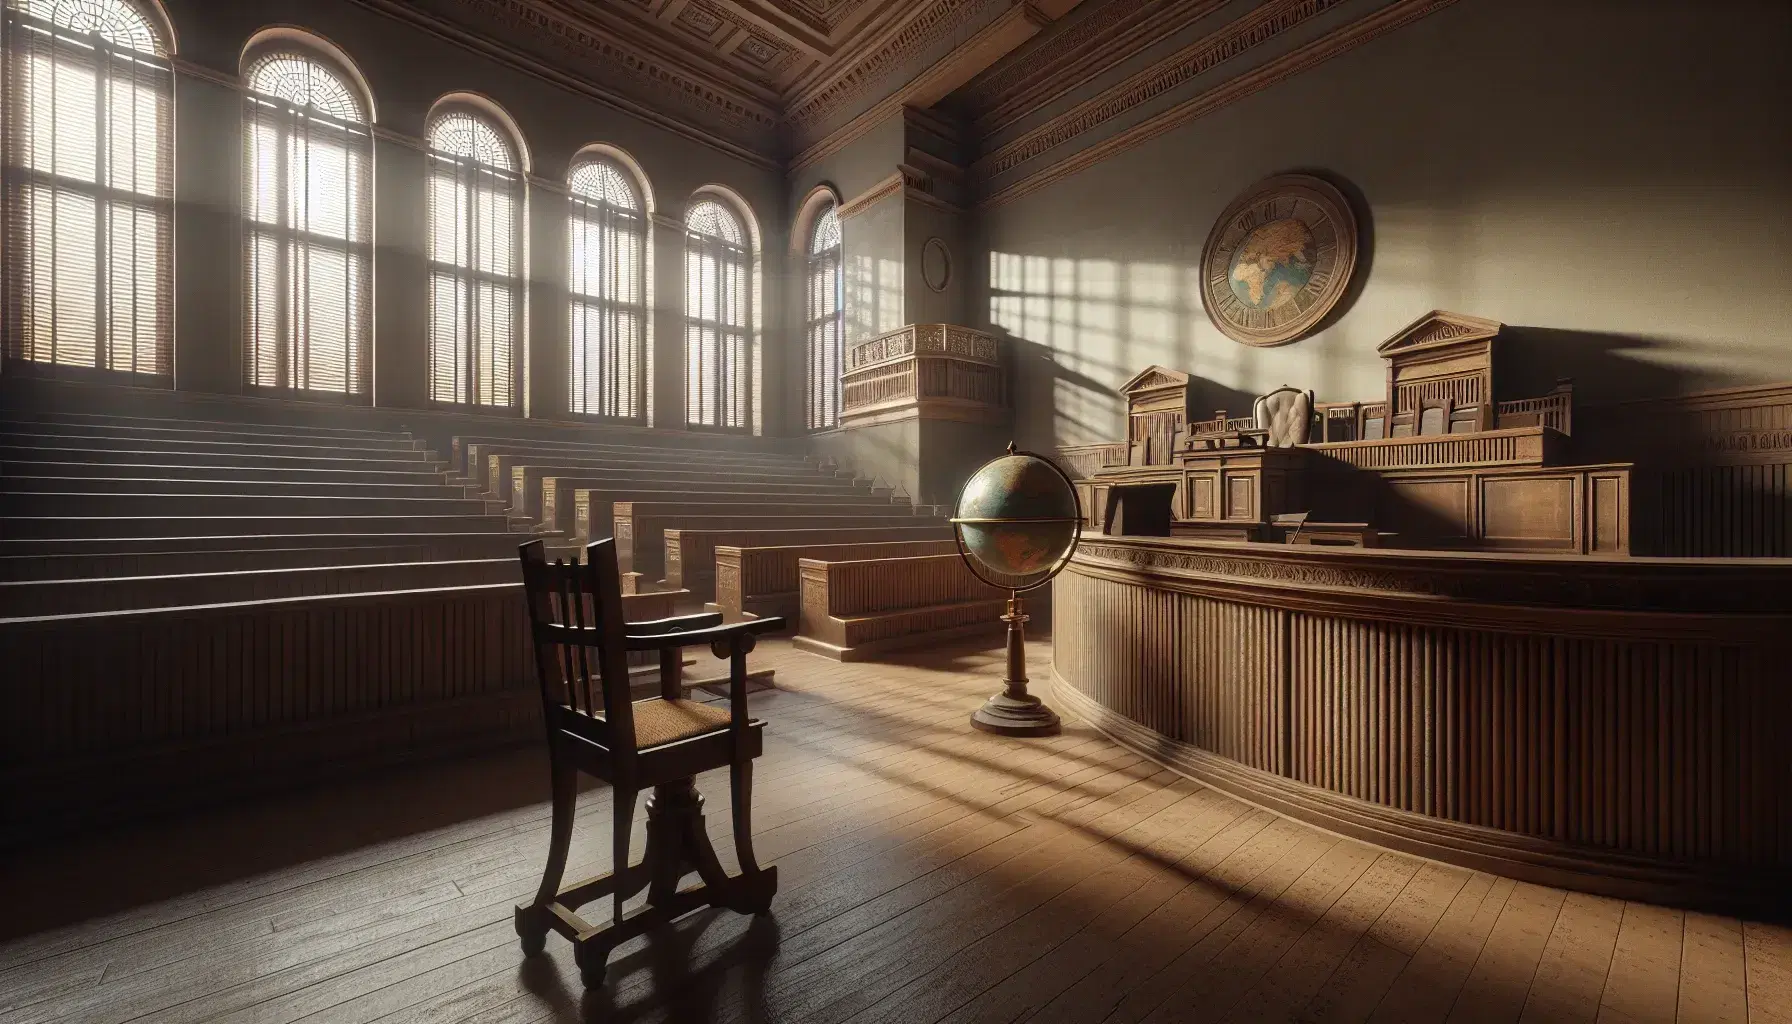 1920s courtroom interior with empty witness stand, elevated judge's bench, wooden spectator benches, and a vintage globe on a stand.